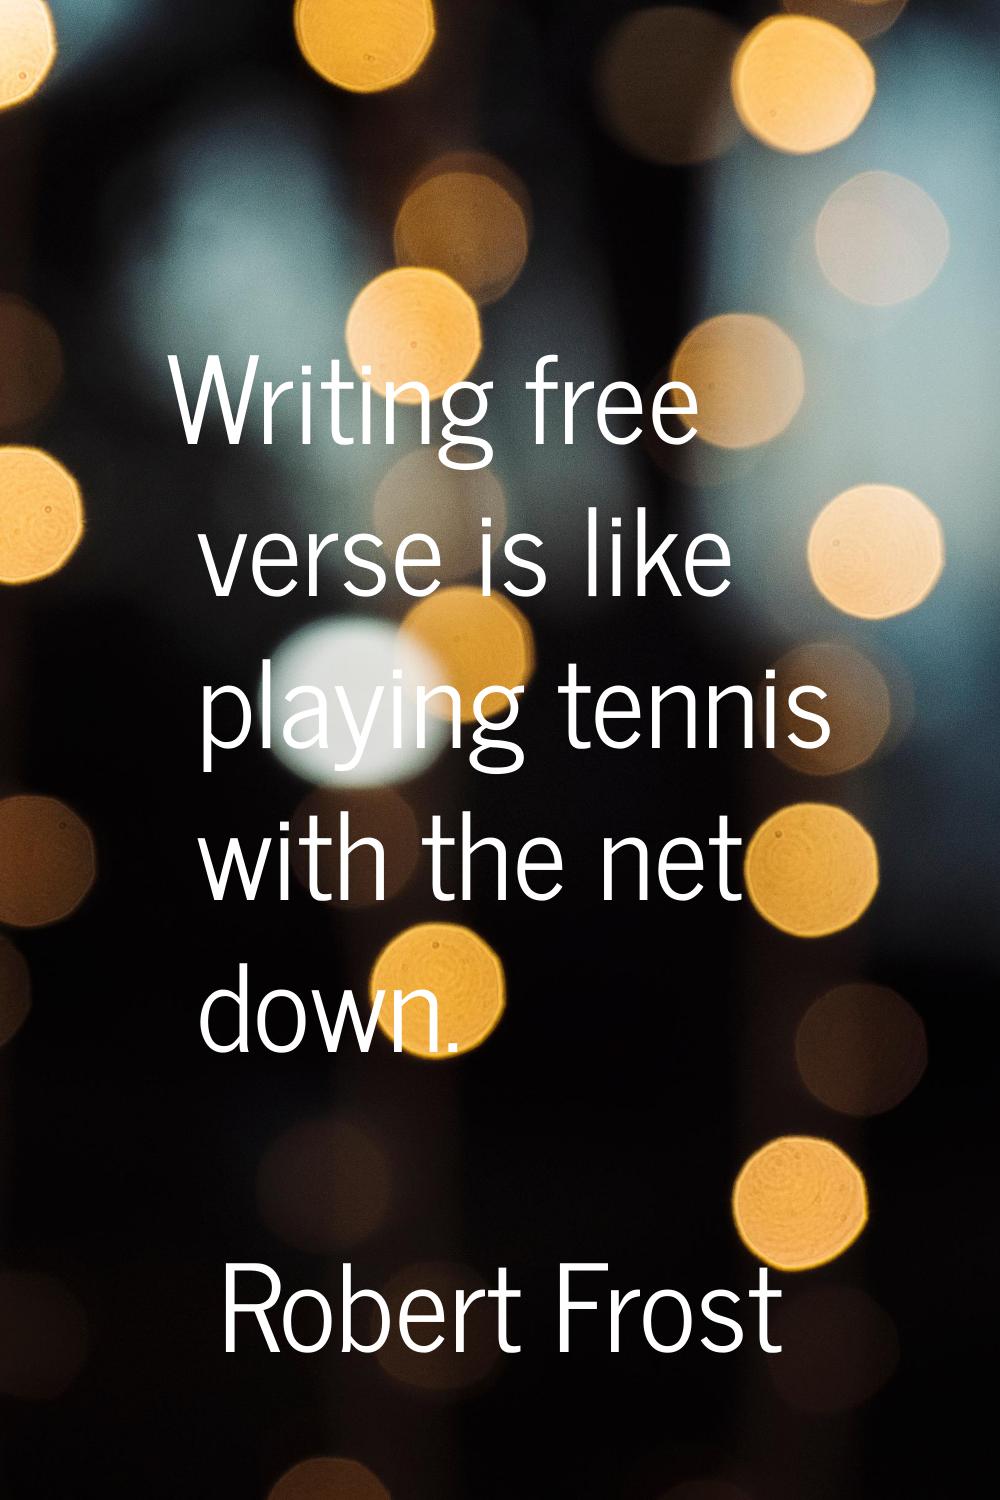 Writing free verse is like playing tennis with the net down.